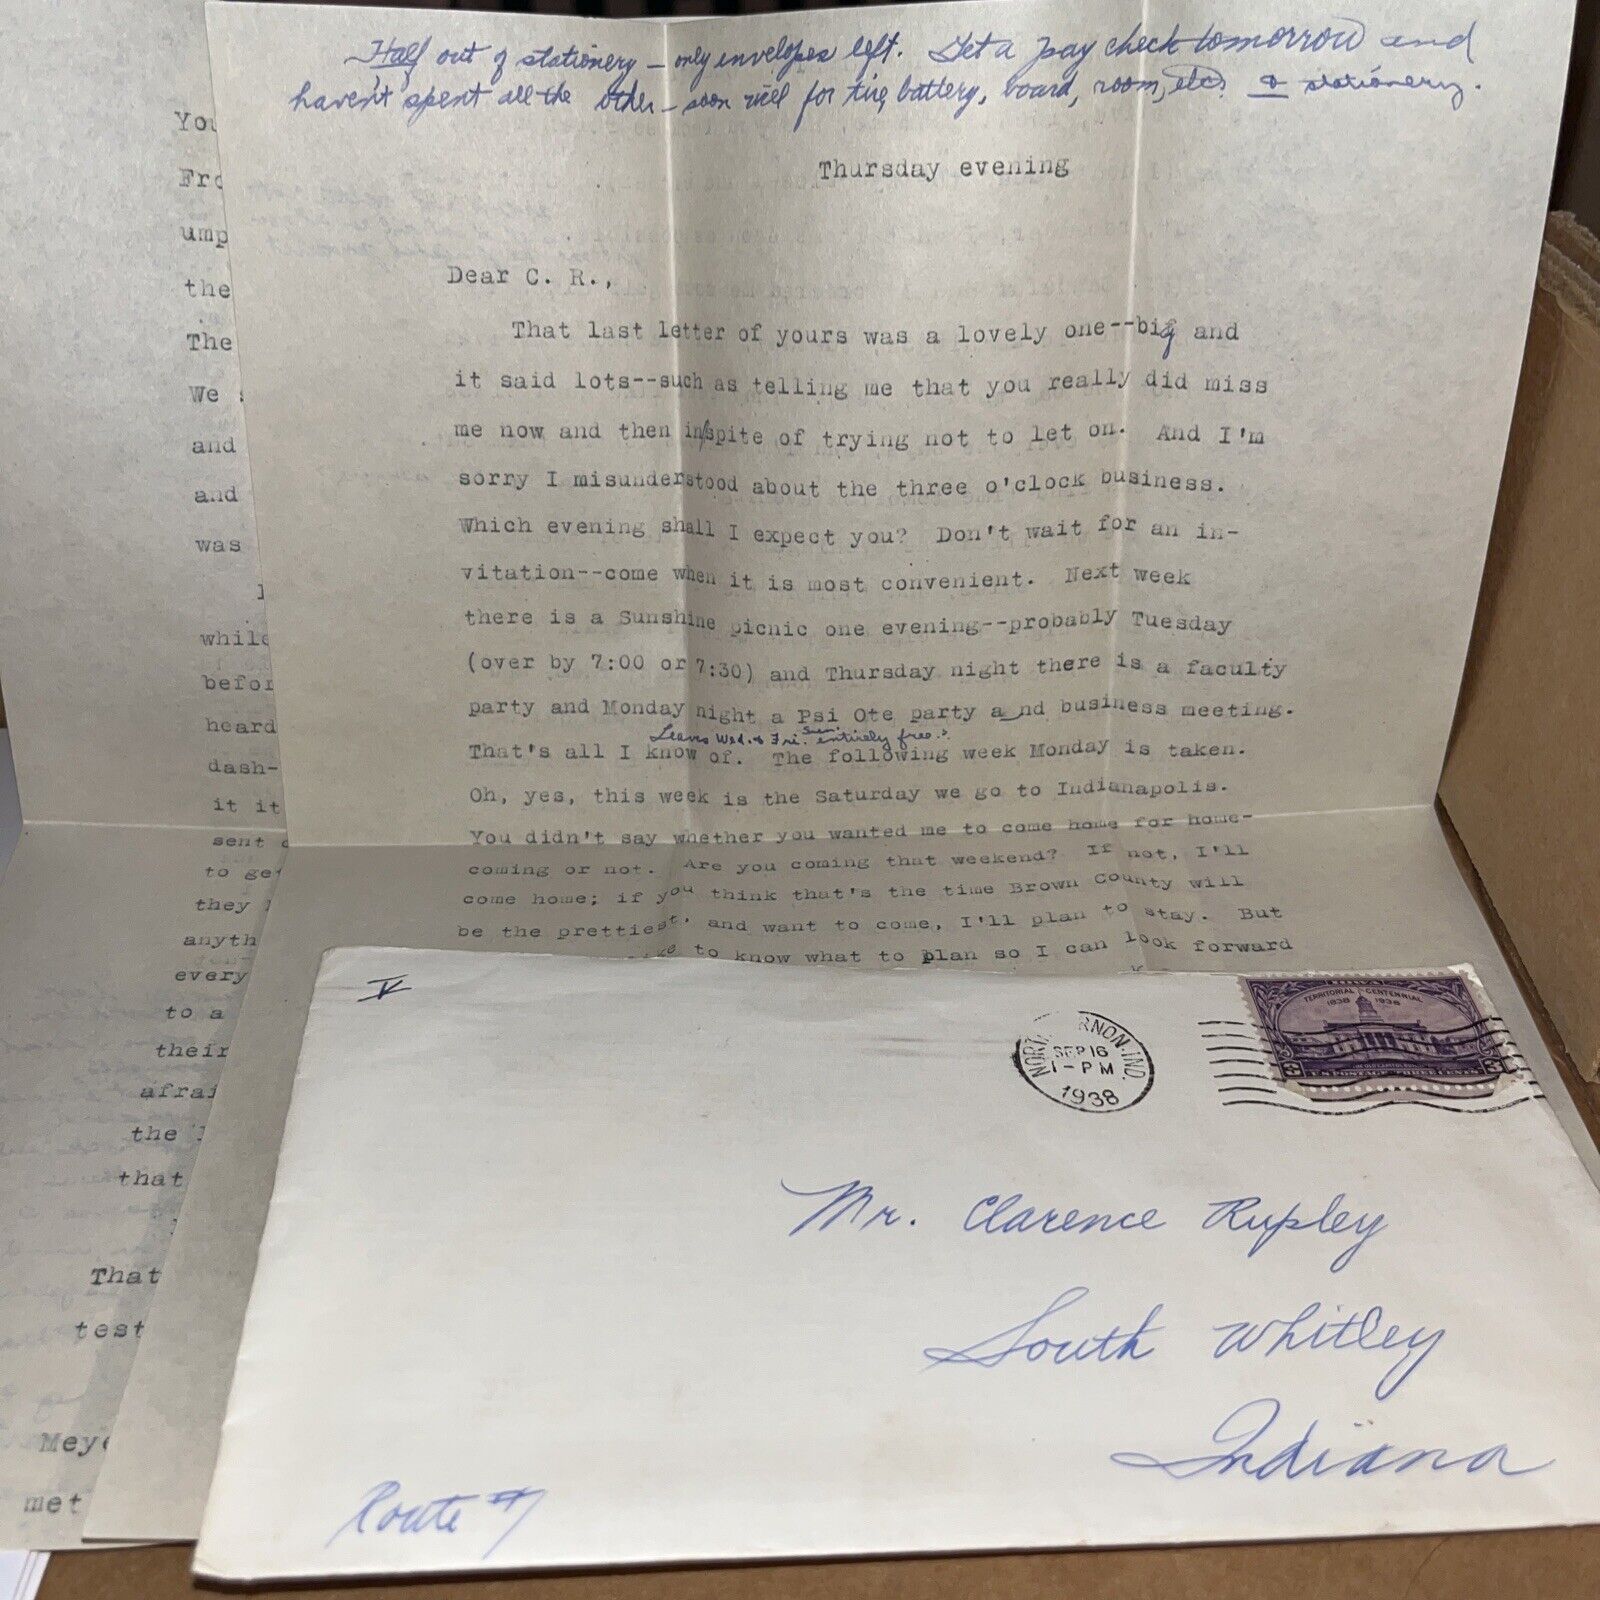 1938 Correspondence to South Whitley Indiana: Female Learns Golf, Predicts WWII